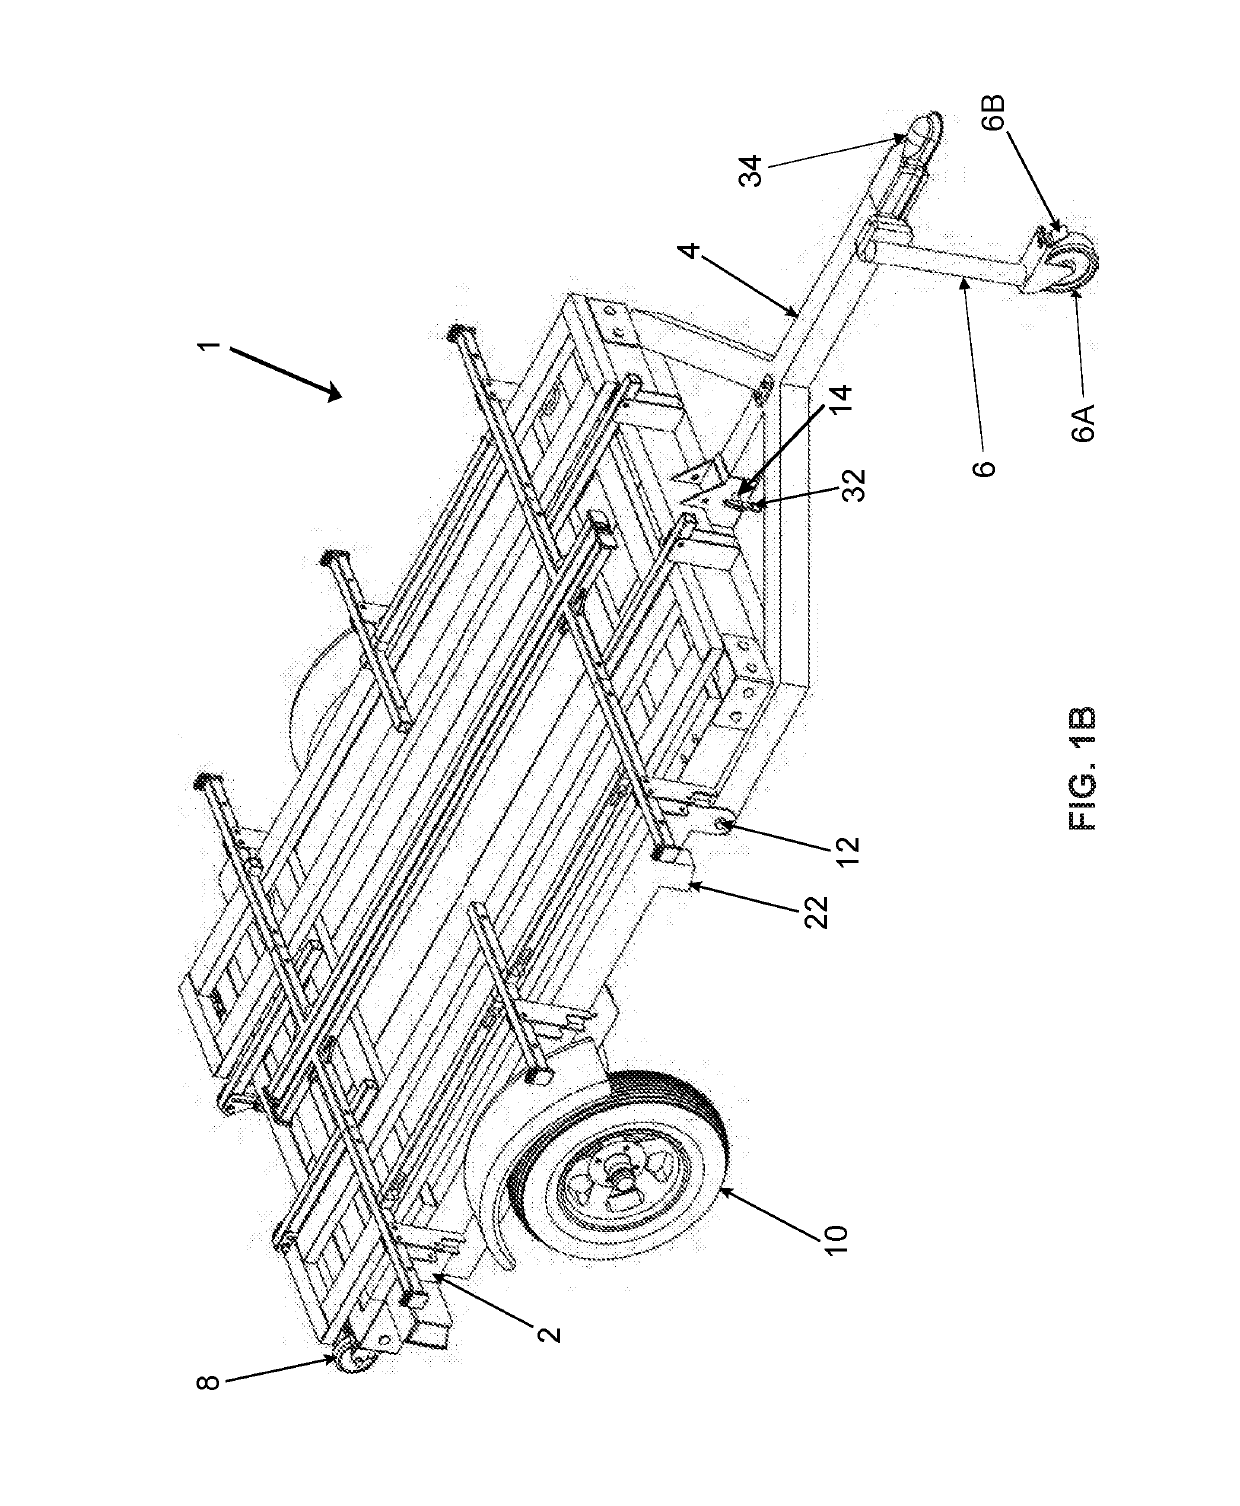 Folding trailer for stowage and methods of use